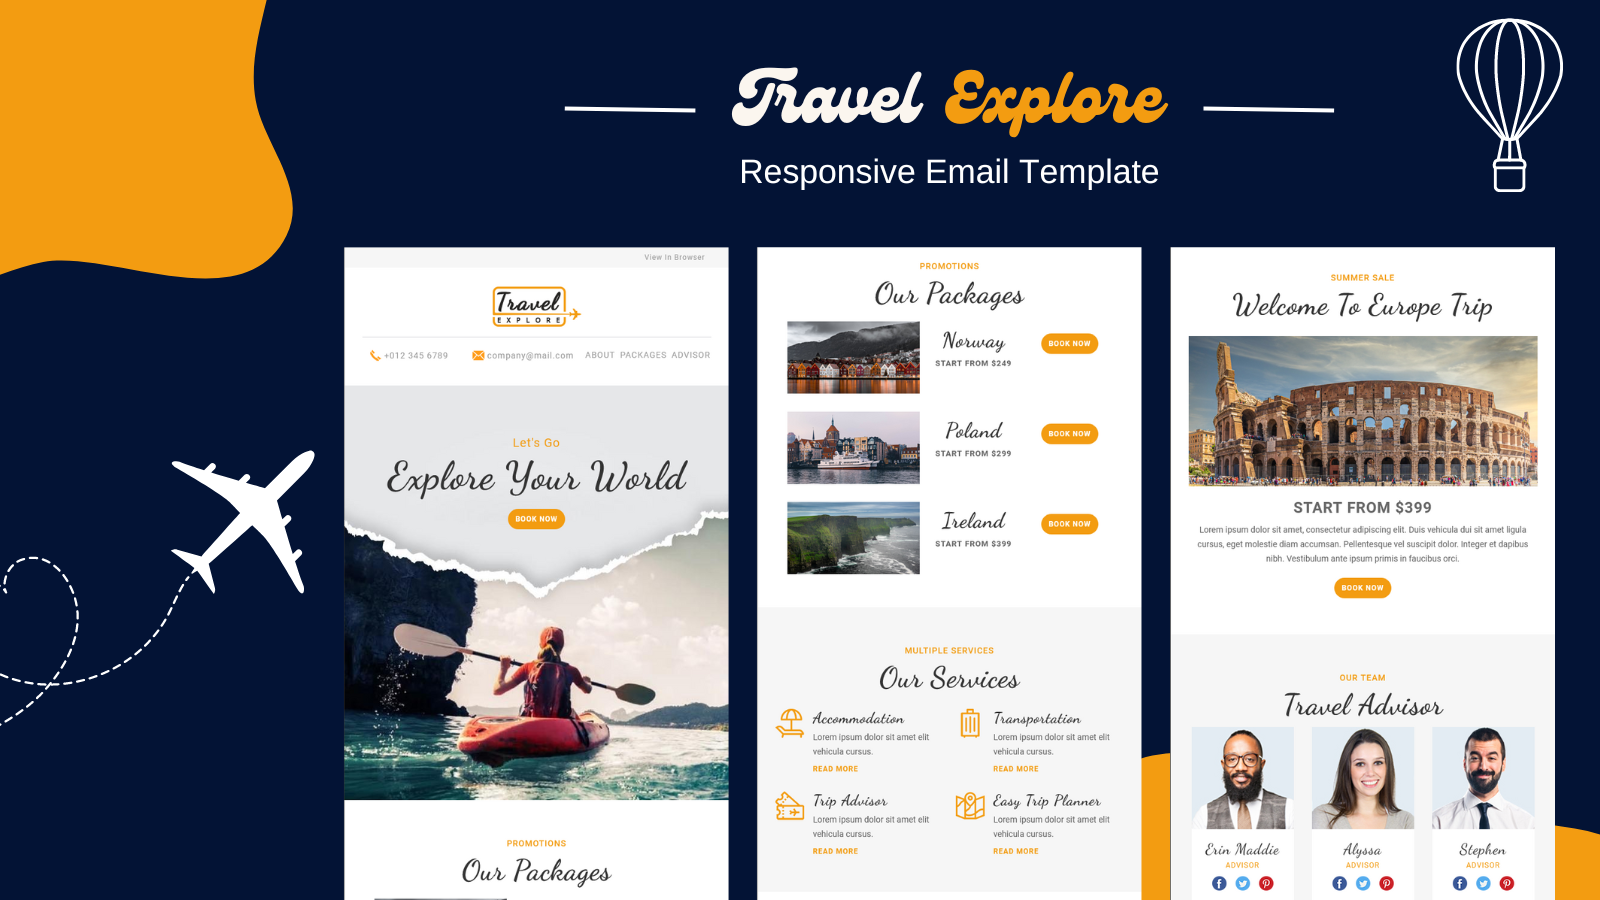 Travel Explore – Responsive Email Template